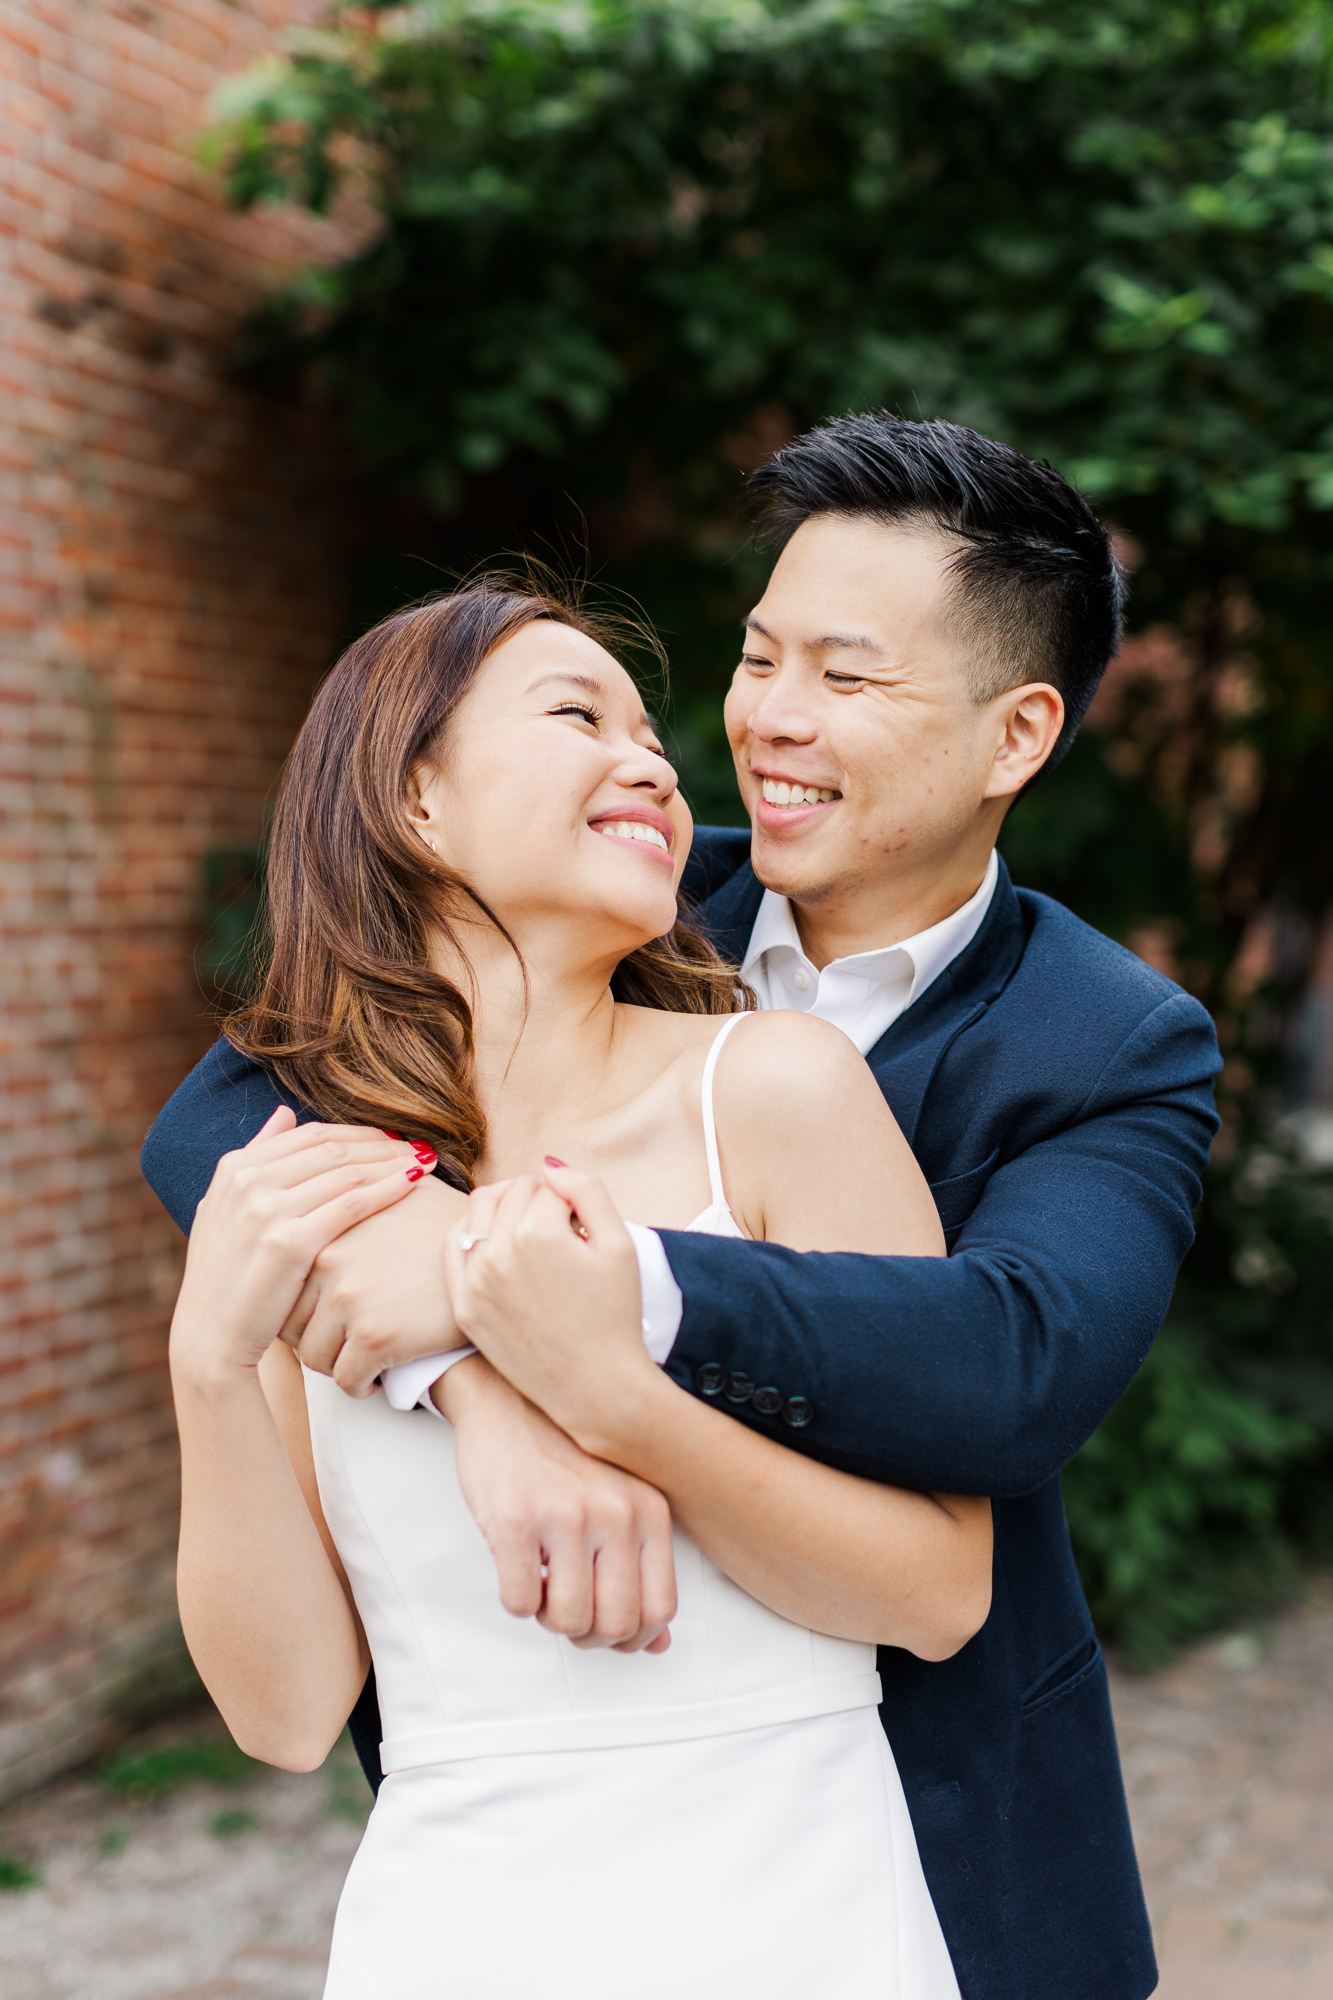 The Best Time of Year for Stunning DUMBO Engagement Photos